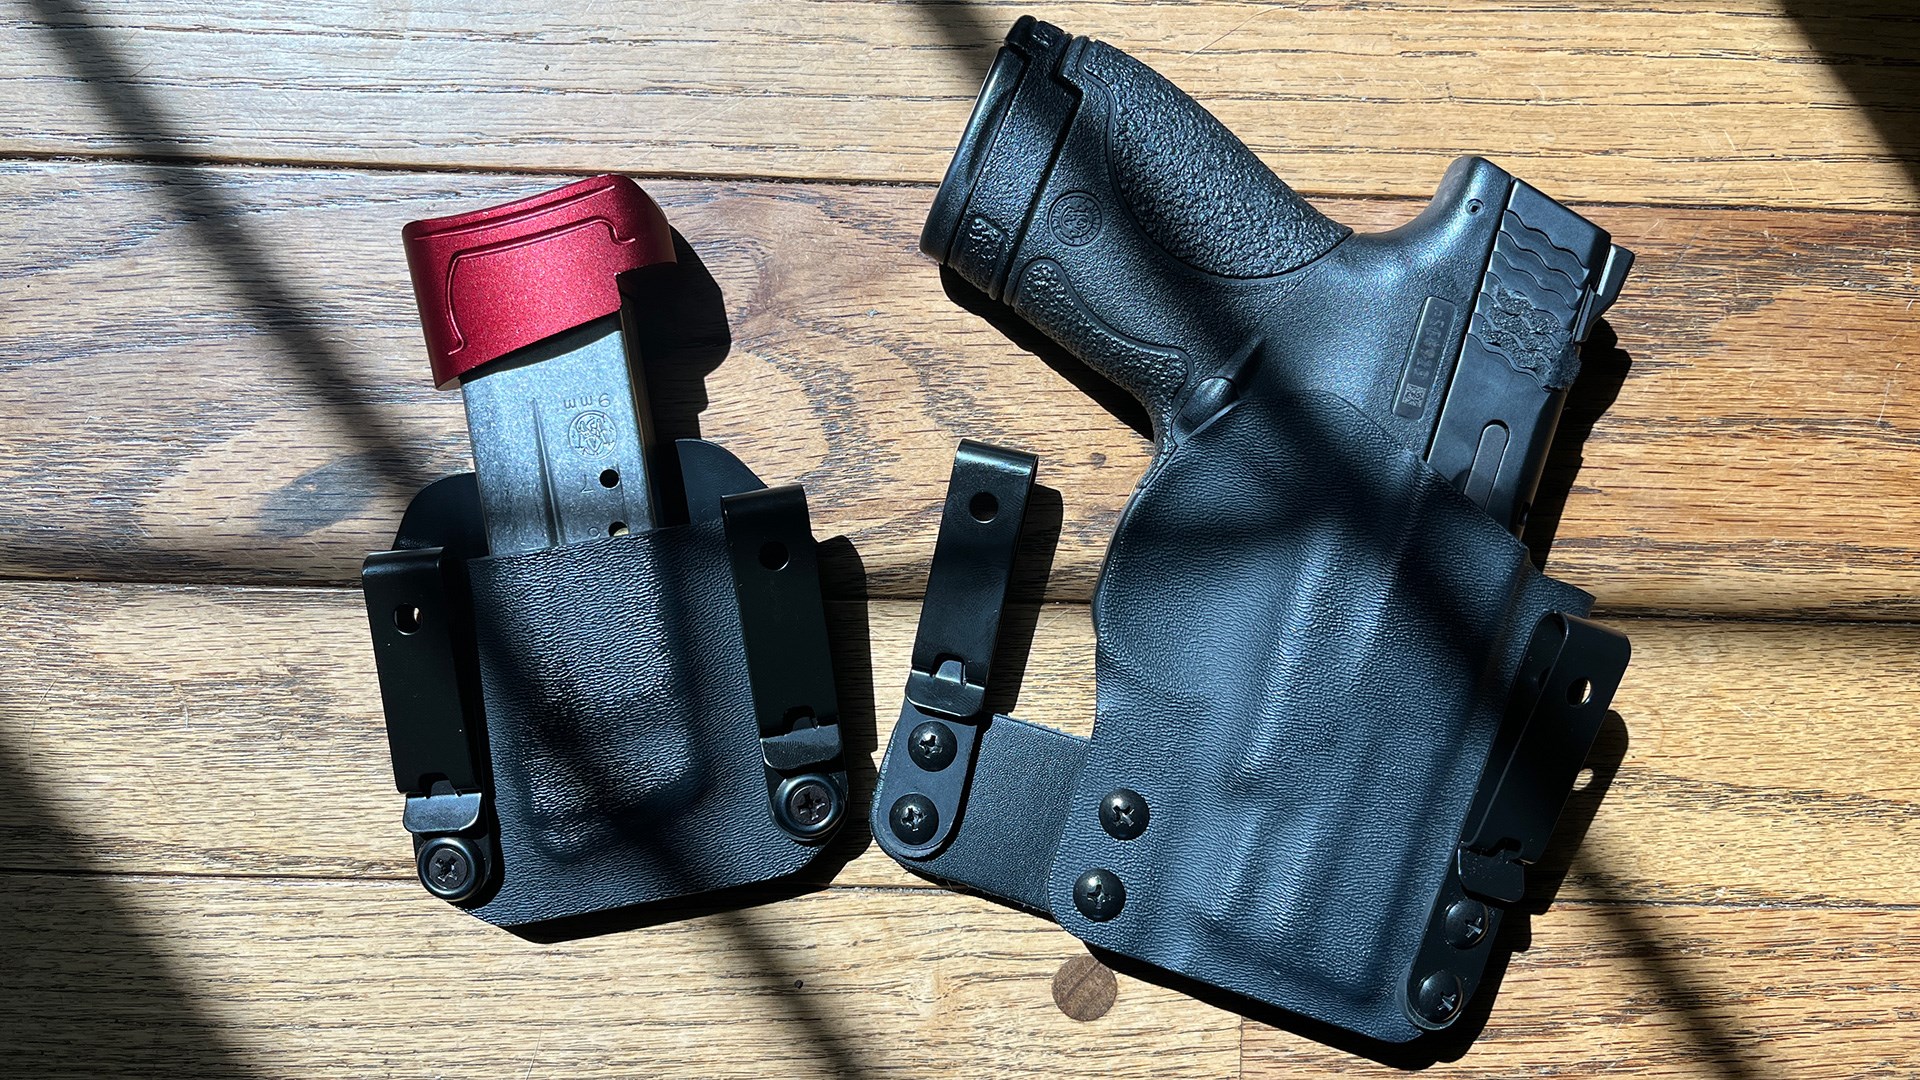 Holster and magazine pouch